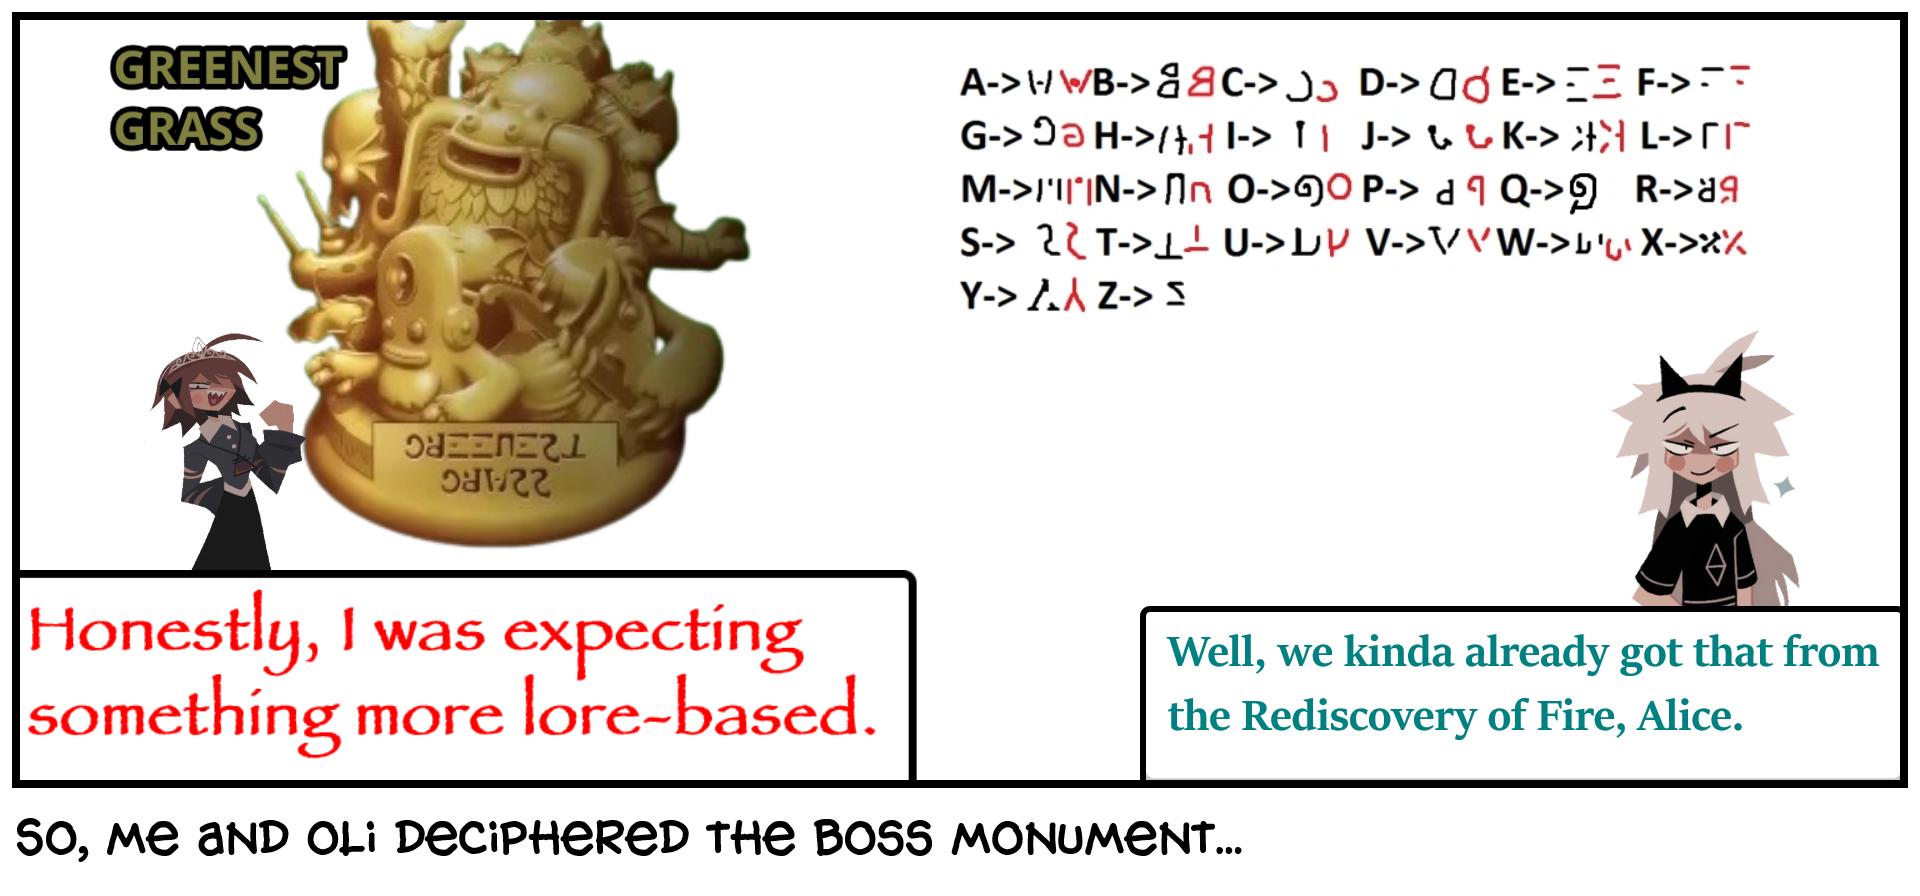 So, me and oli deciphered the boss monument...